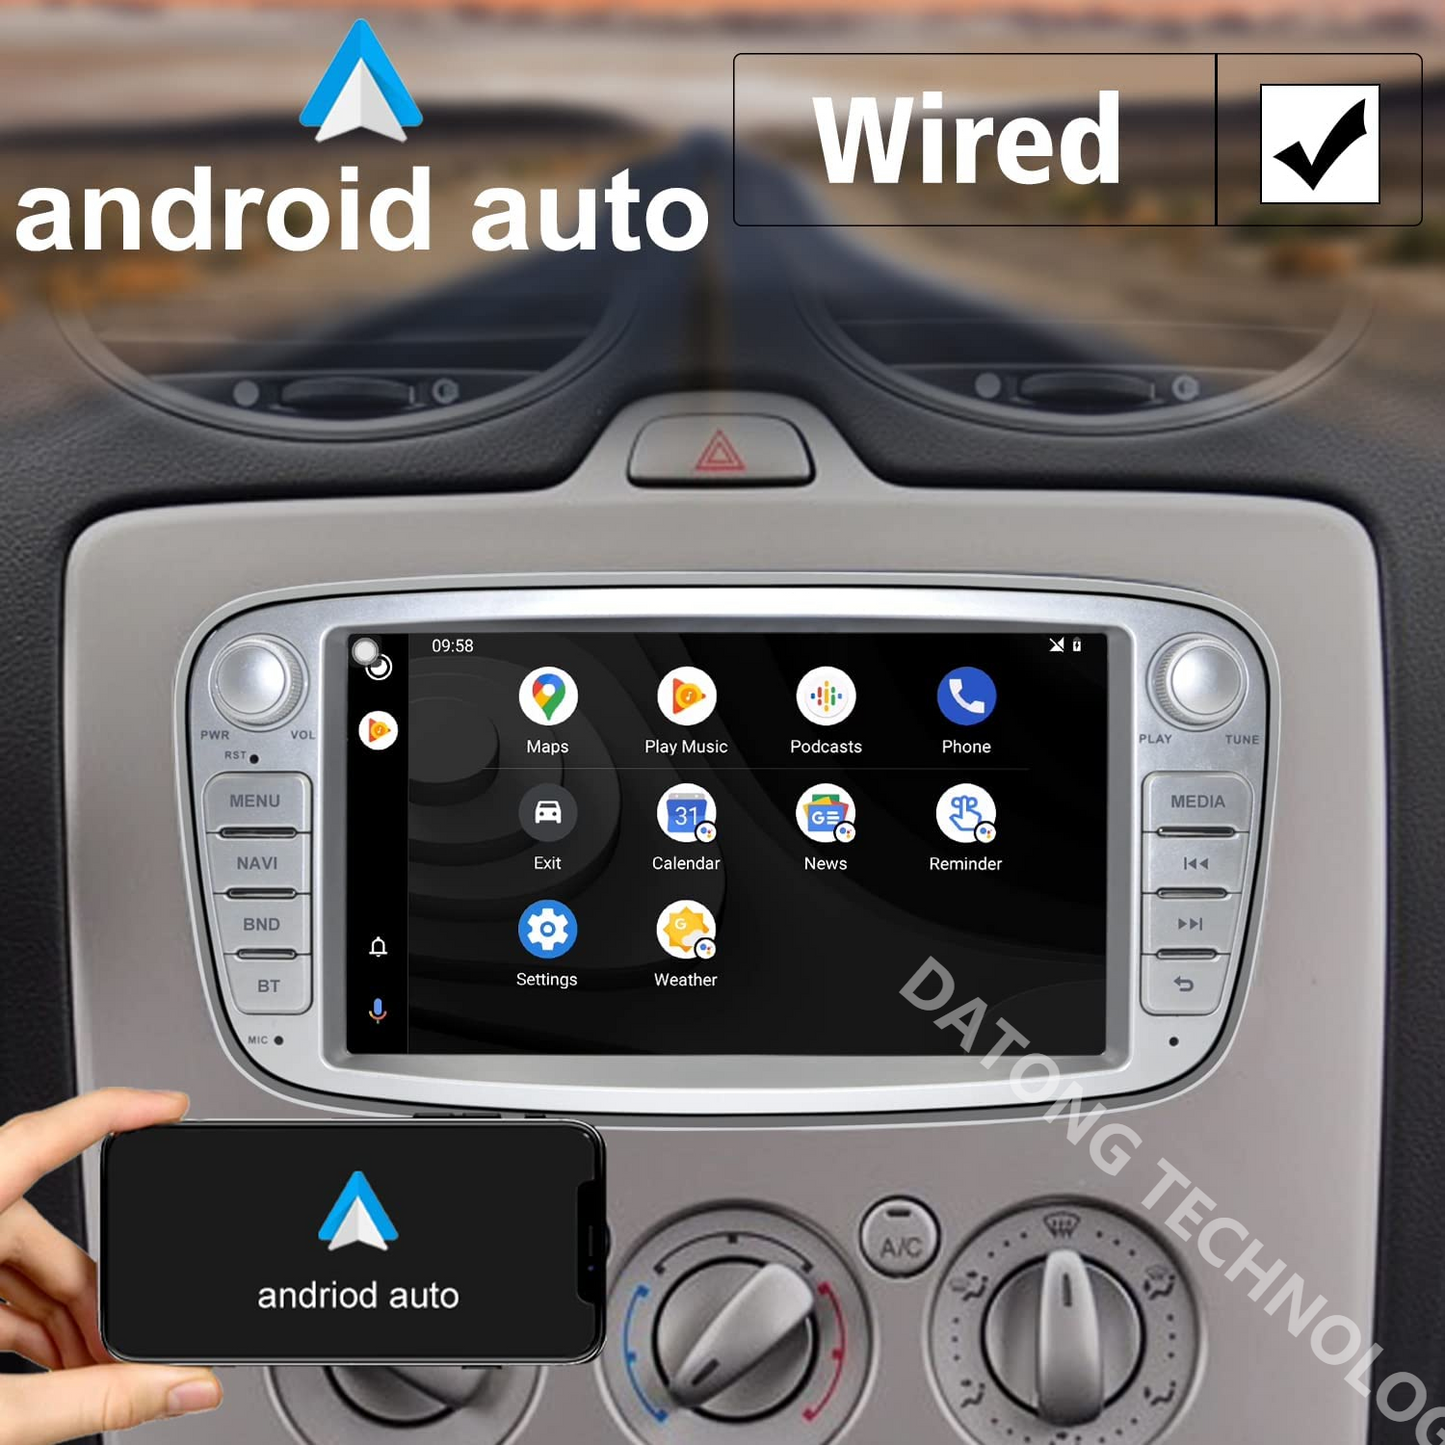 Android 10 Car Radio for Ford Focus Mondeo 2GB + 32GB Wireless CarPlay & Wired Android Car 7 Inch Screen Car Audio Stereo with Sat Nav, AM/FM RDS Radio, WiFi, Bluetooth Satnav